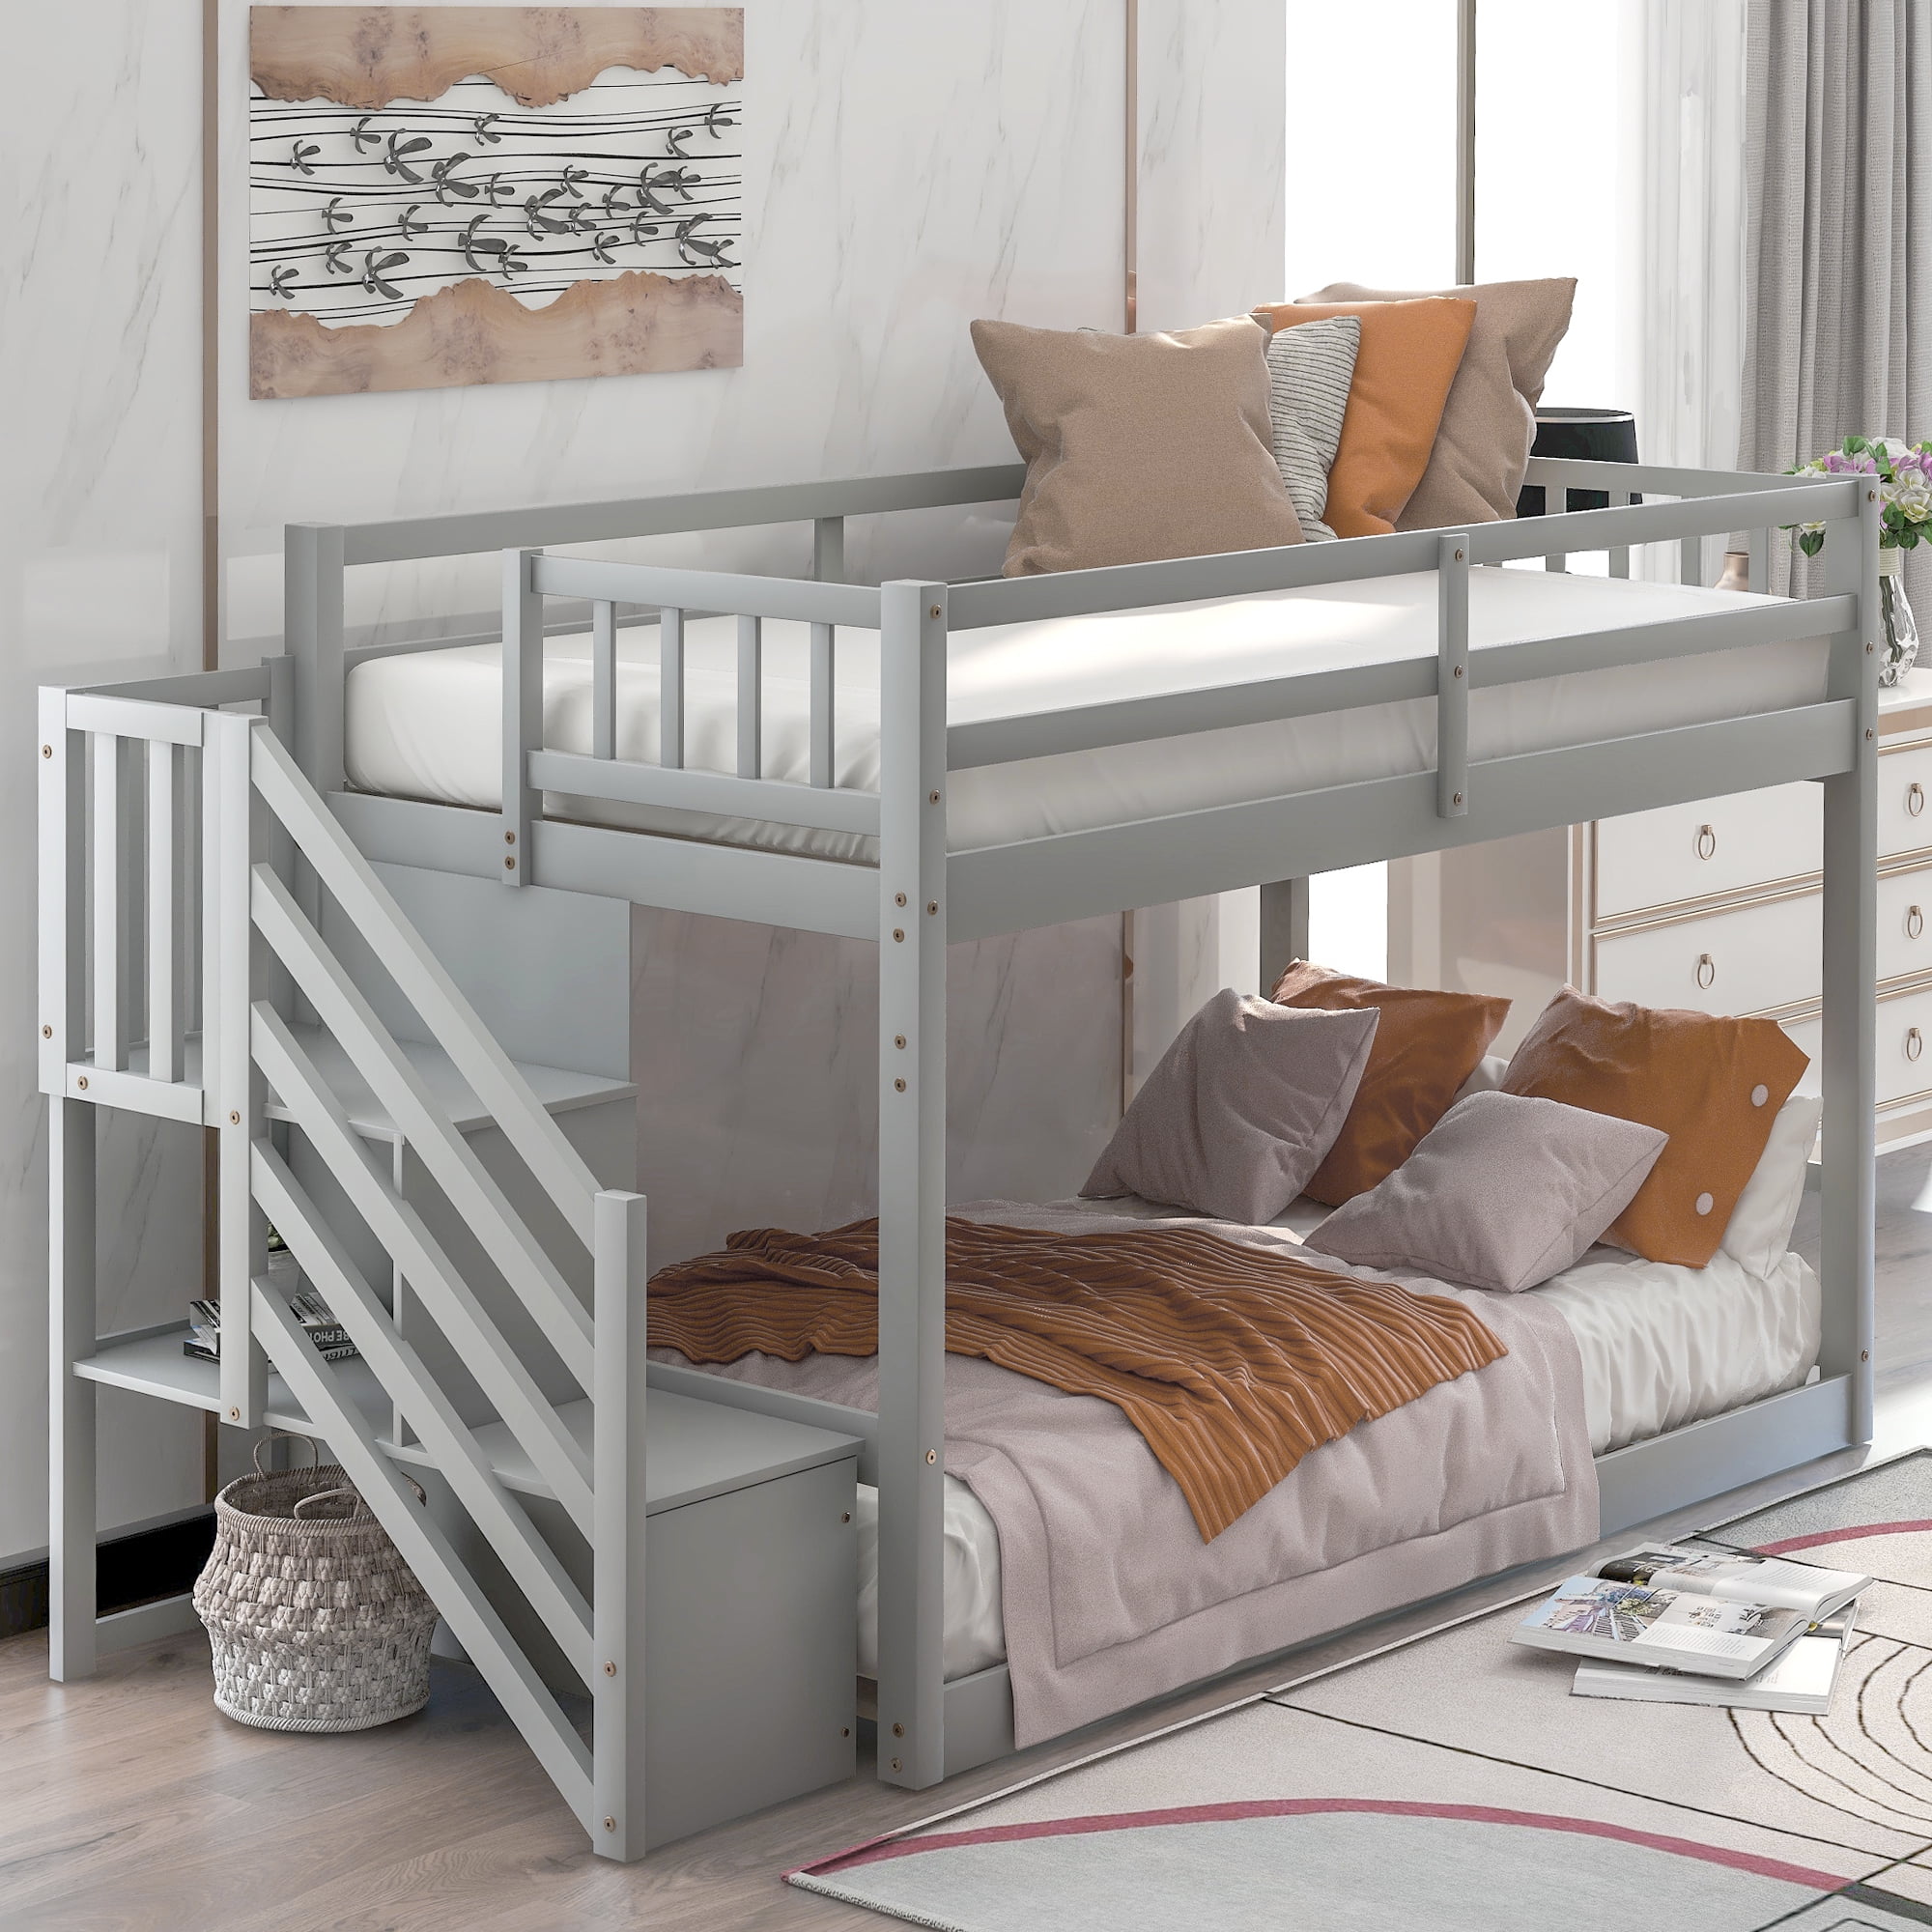 Low Bunk Bed With Stairs And Storage, Is A Twin Bed Big Enough For Teenager